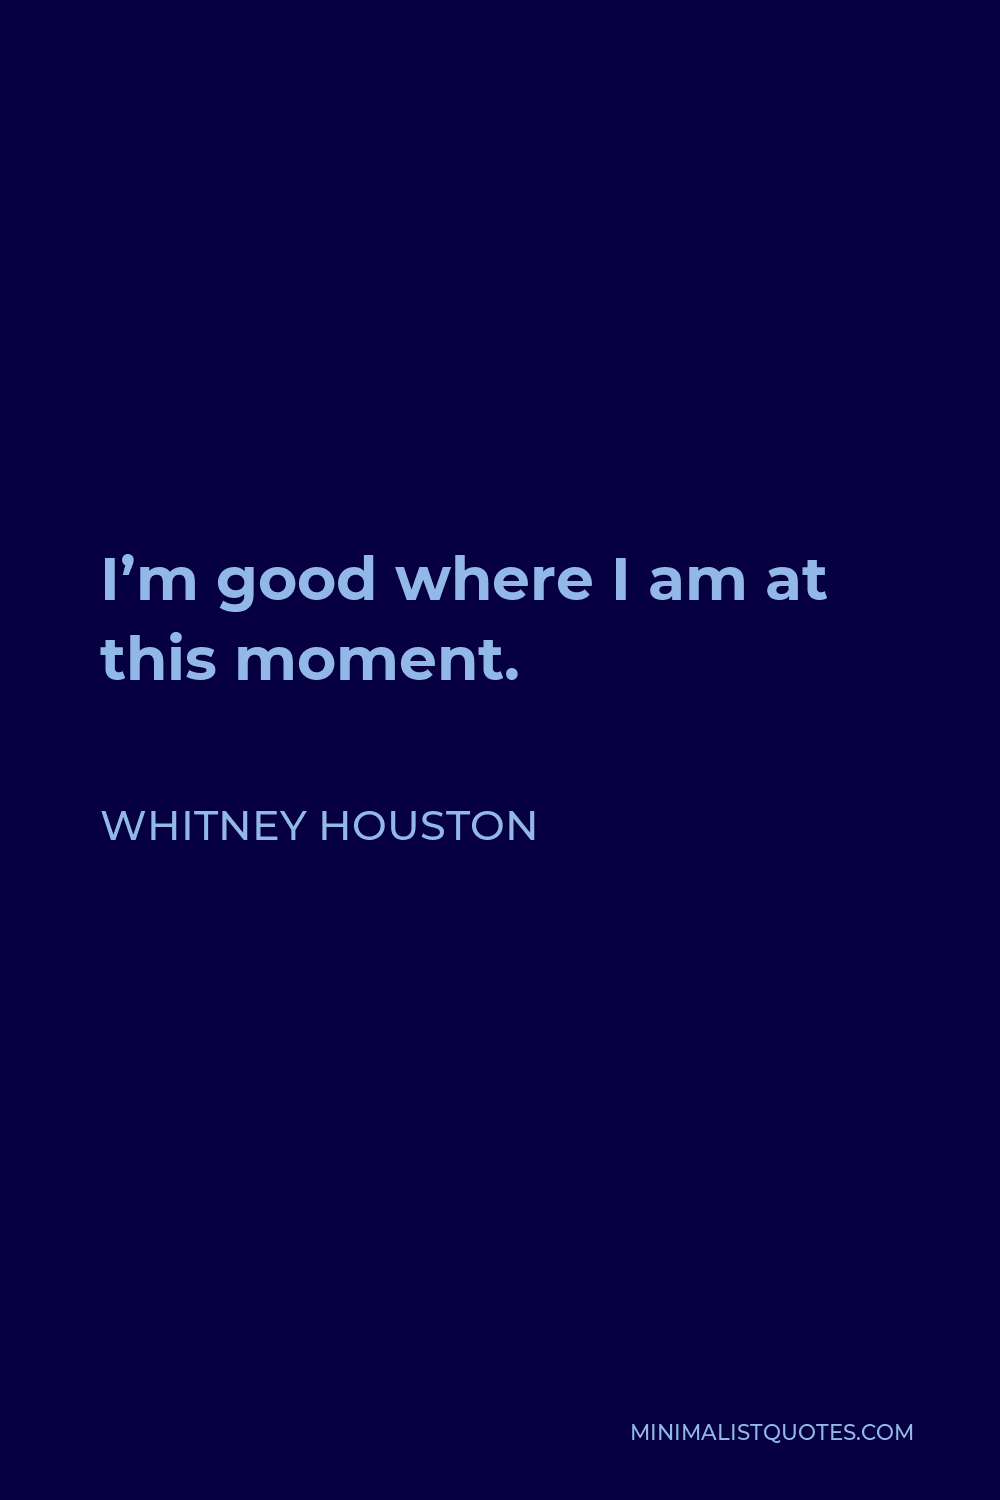 Whitney Houston Quote - I’m good where I am at this moment.